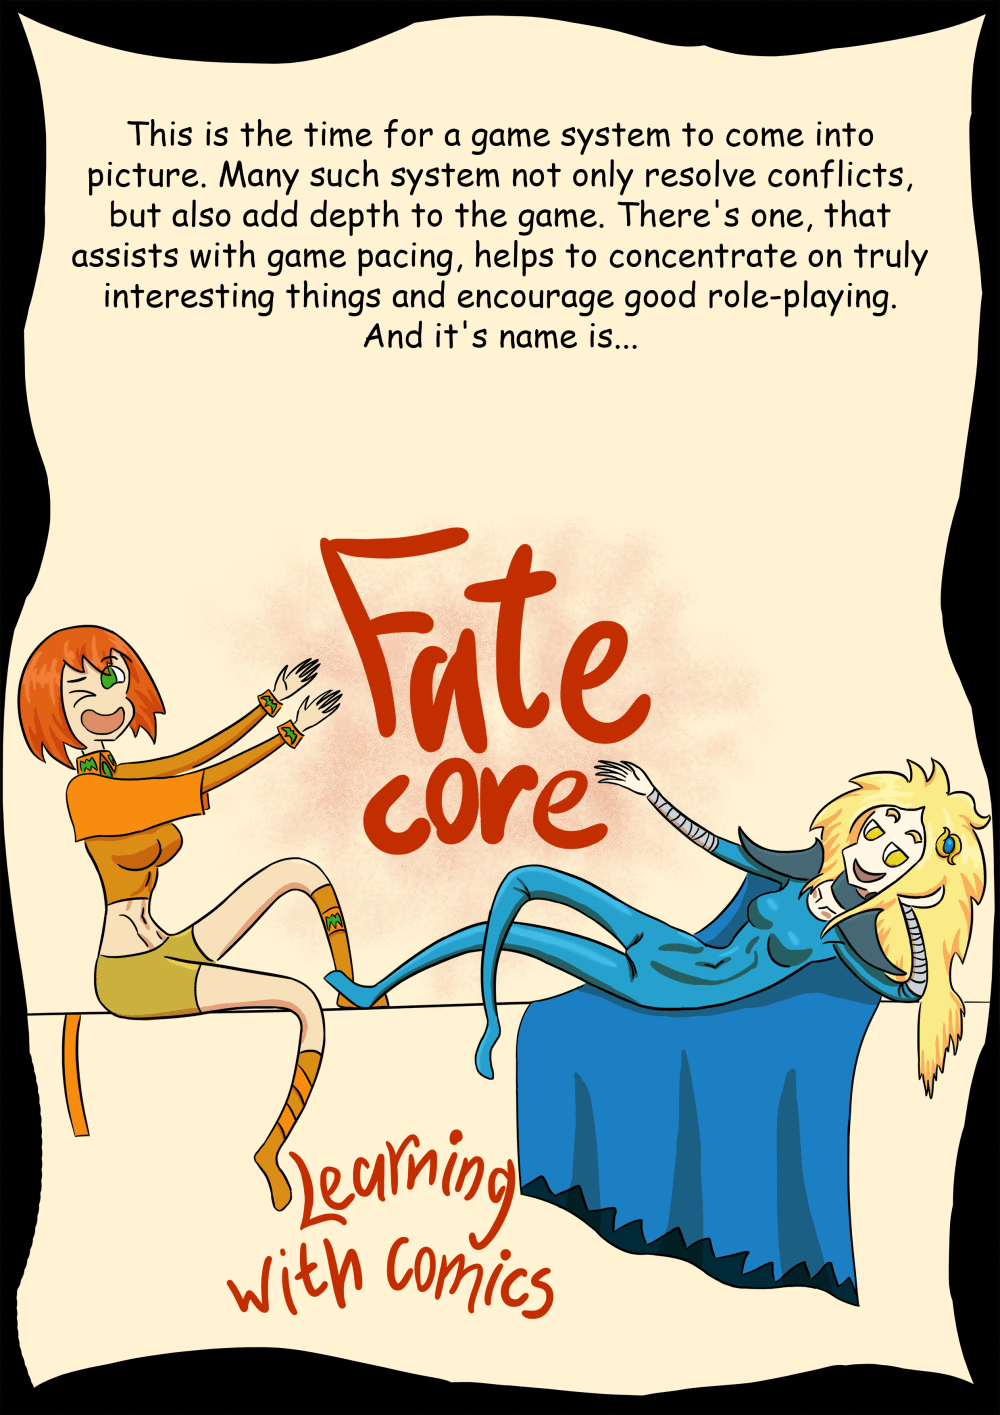 How do you play Fate Core?